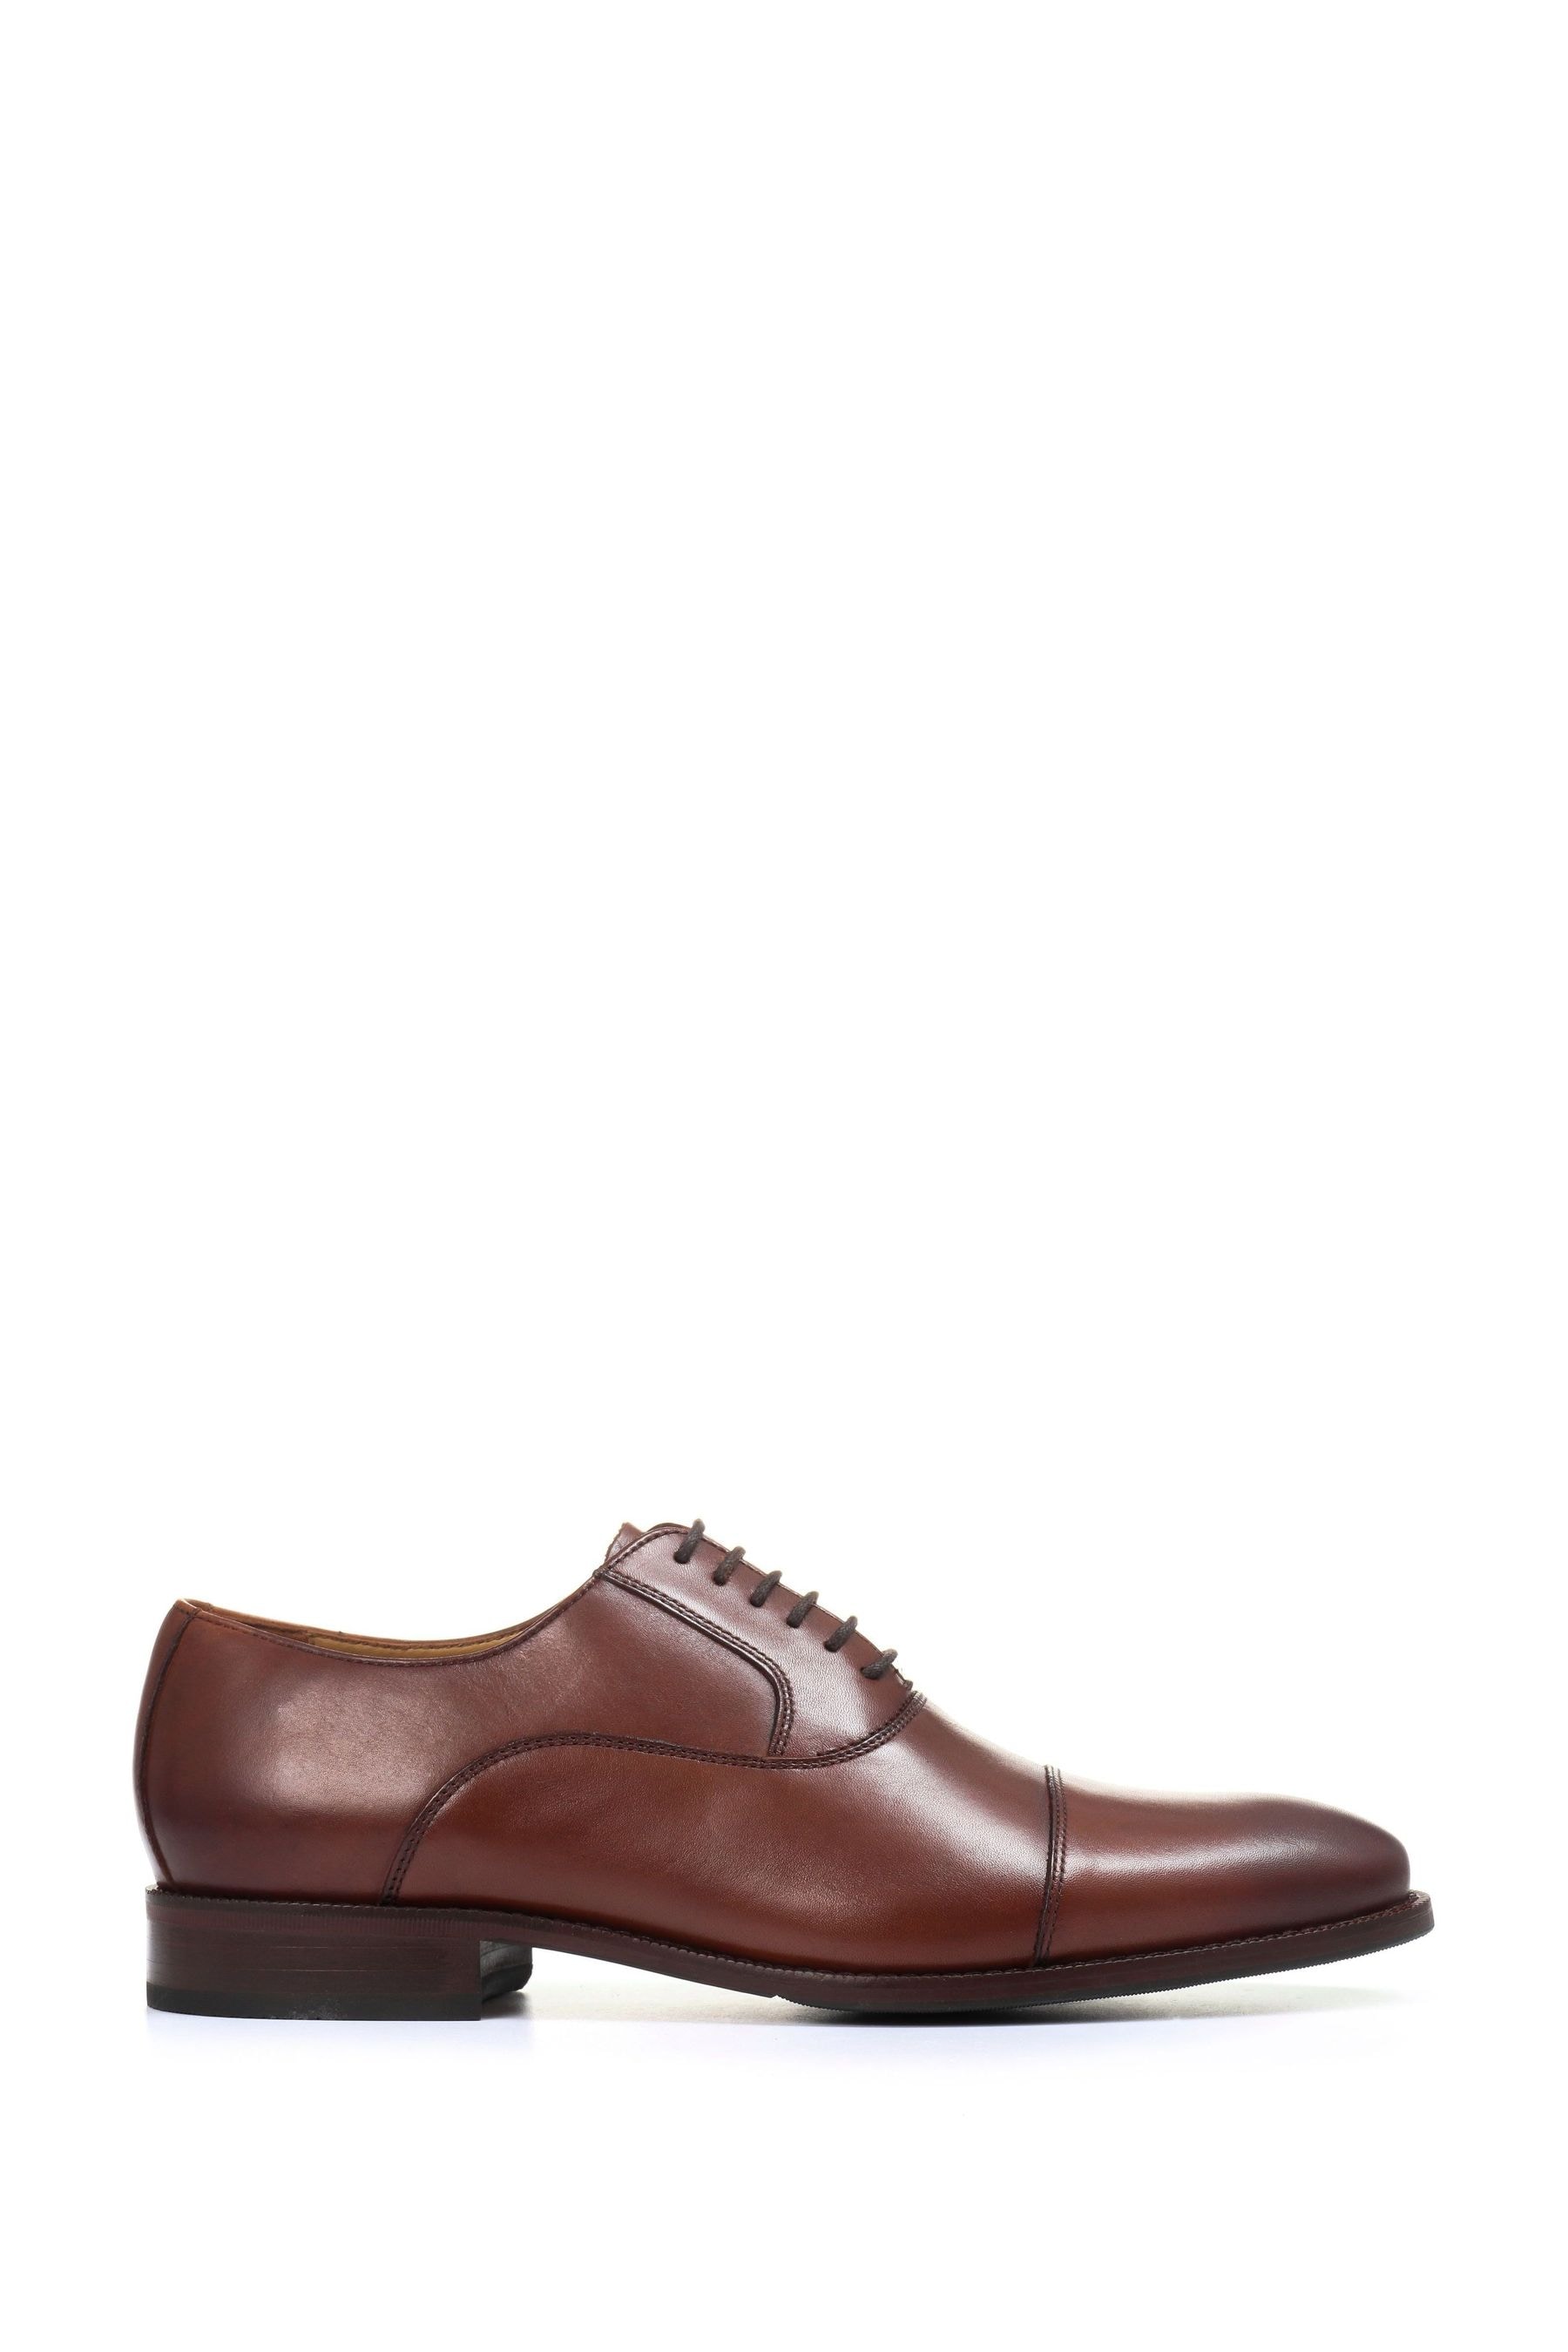 Buy Jones Bootmaker Matthew Tan Leather Oxford Shoes from the Next UK ...